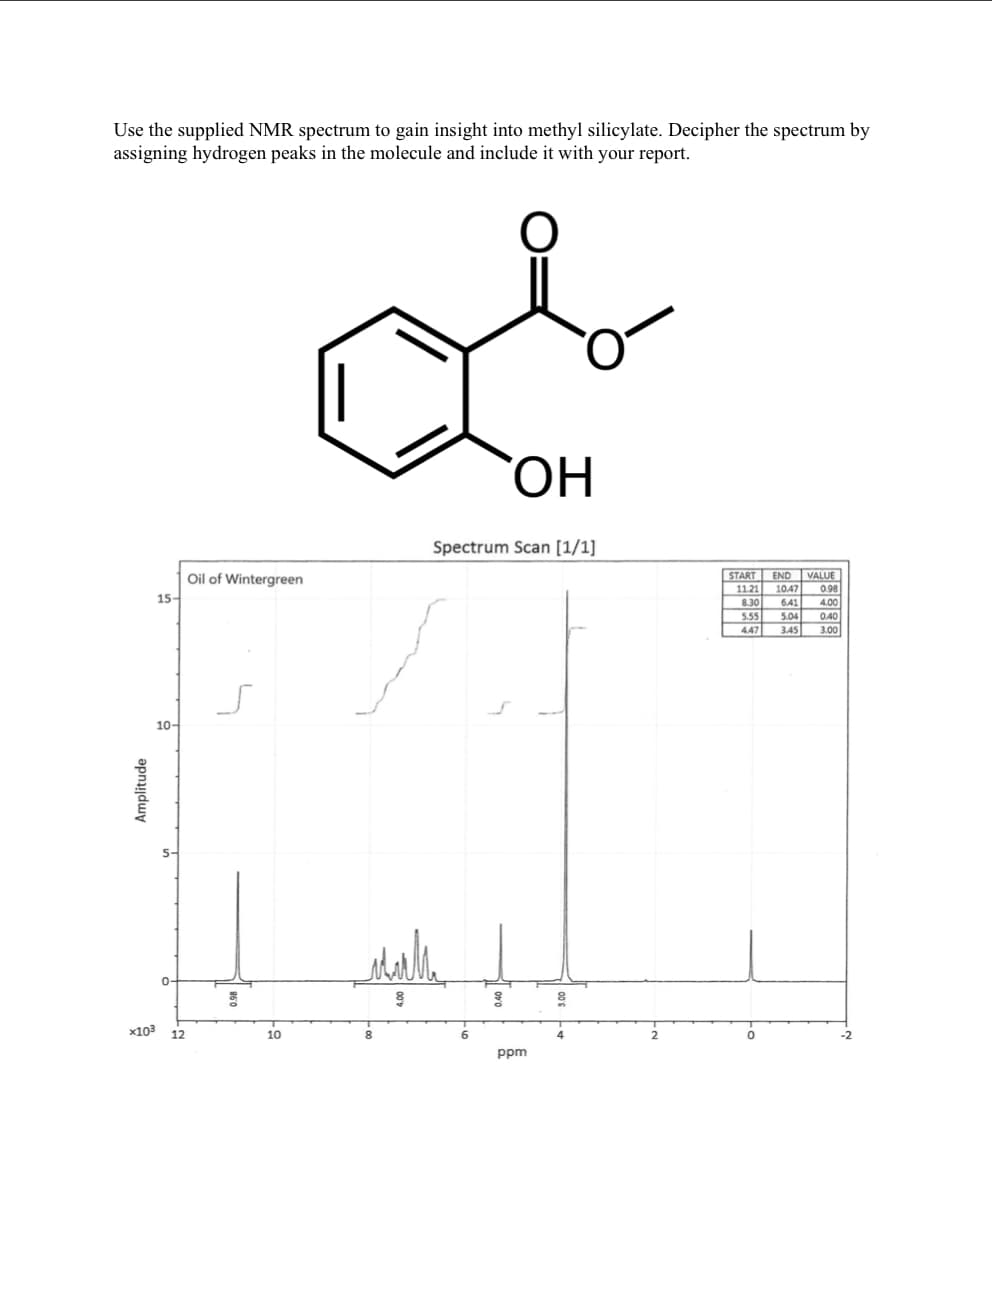 Amplitude
°
Use the supplied NMR spectrum to gain insight into methyl silicylate. Decipher the spectrum by
assigning hydrogen peaks in the molecule and include it with your report.
15-
10-
5-
x103
12
ہیں
OH
Spectrum Scan [1/1]
Oil of Wintergreen
START
END
VALUE
11.21
10.47
0.98
8.30 6.41 4.00
5.55
5.04
0.40
4.47
3.45
3.00
мили
៖
10
8
6
ppm
2